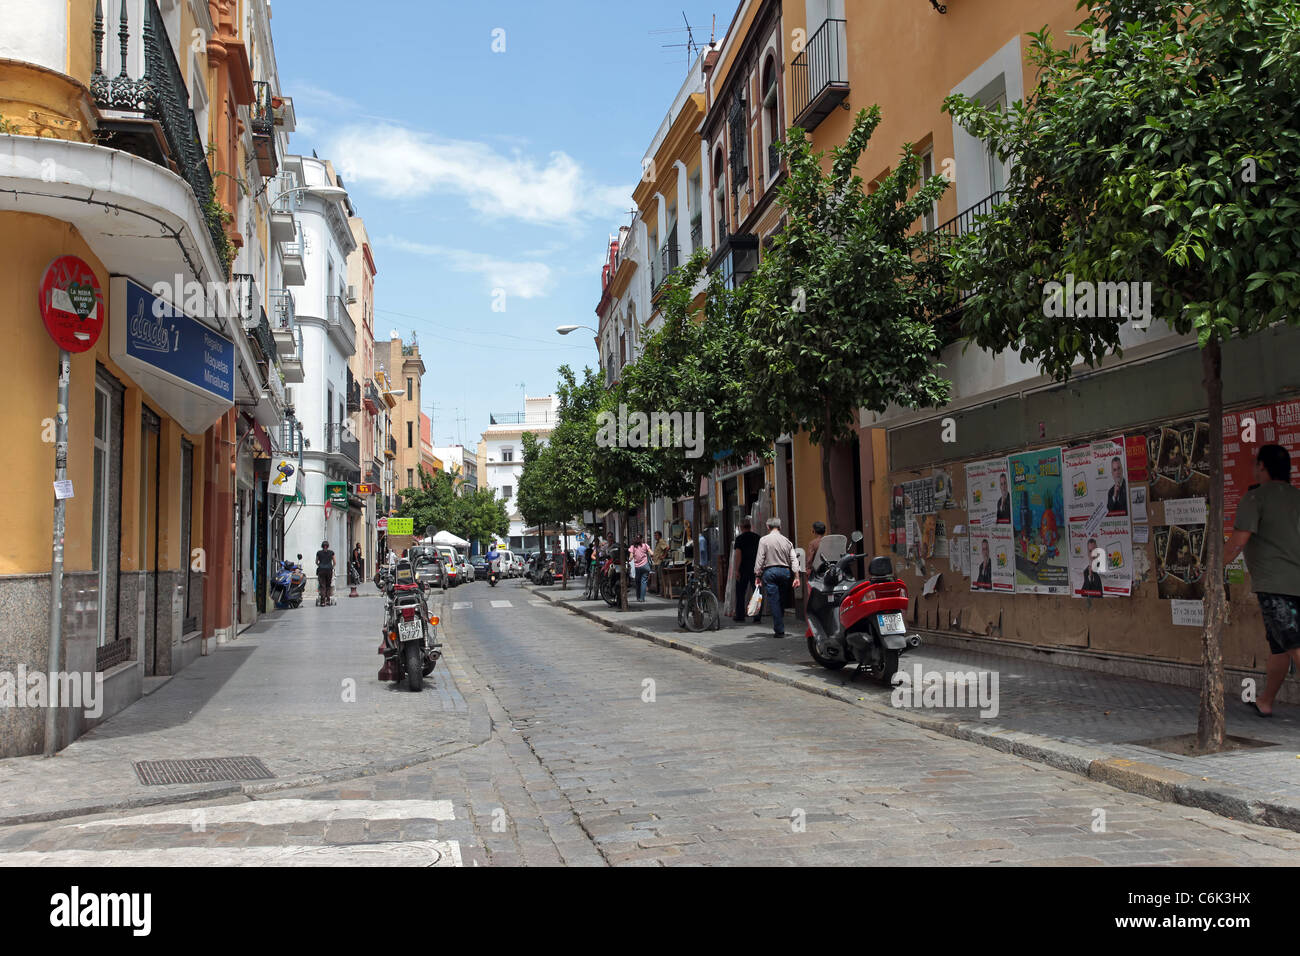 Seville Spain narrow street in old historic part of town. Motorcycles parked on sidewalk as cars drive down cobble stone road. Stock Photo